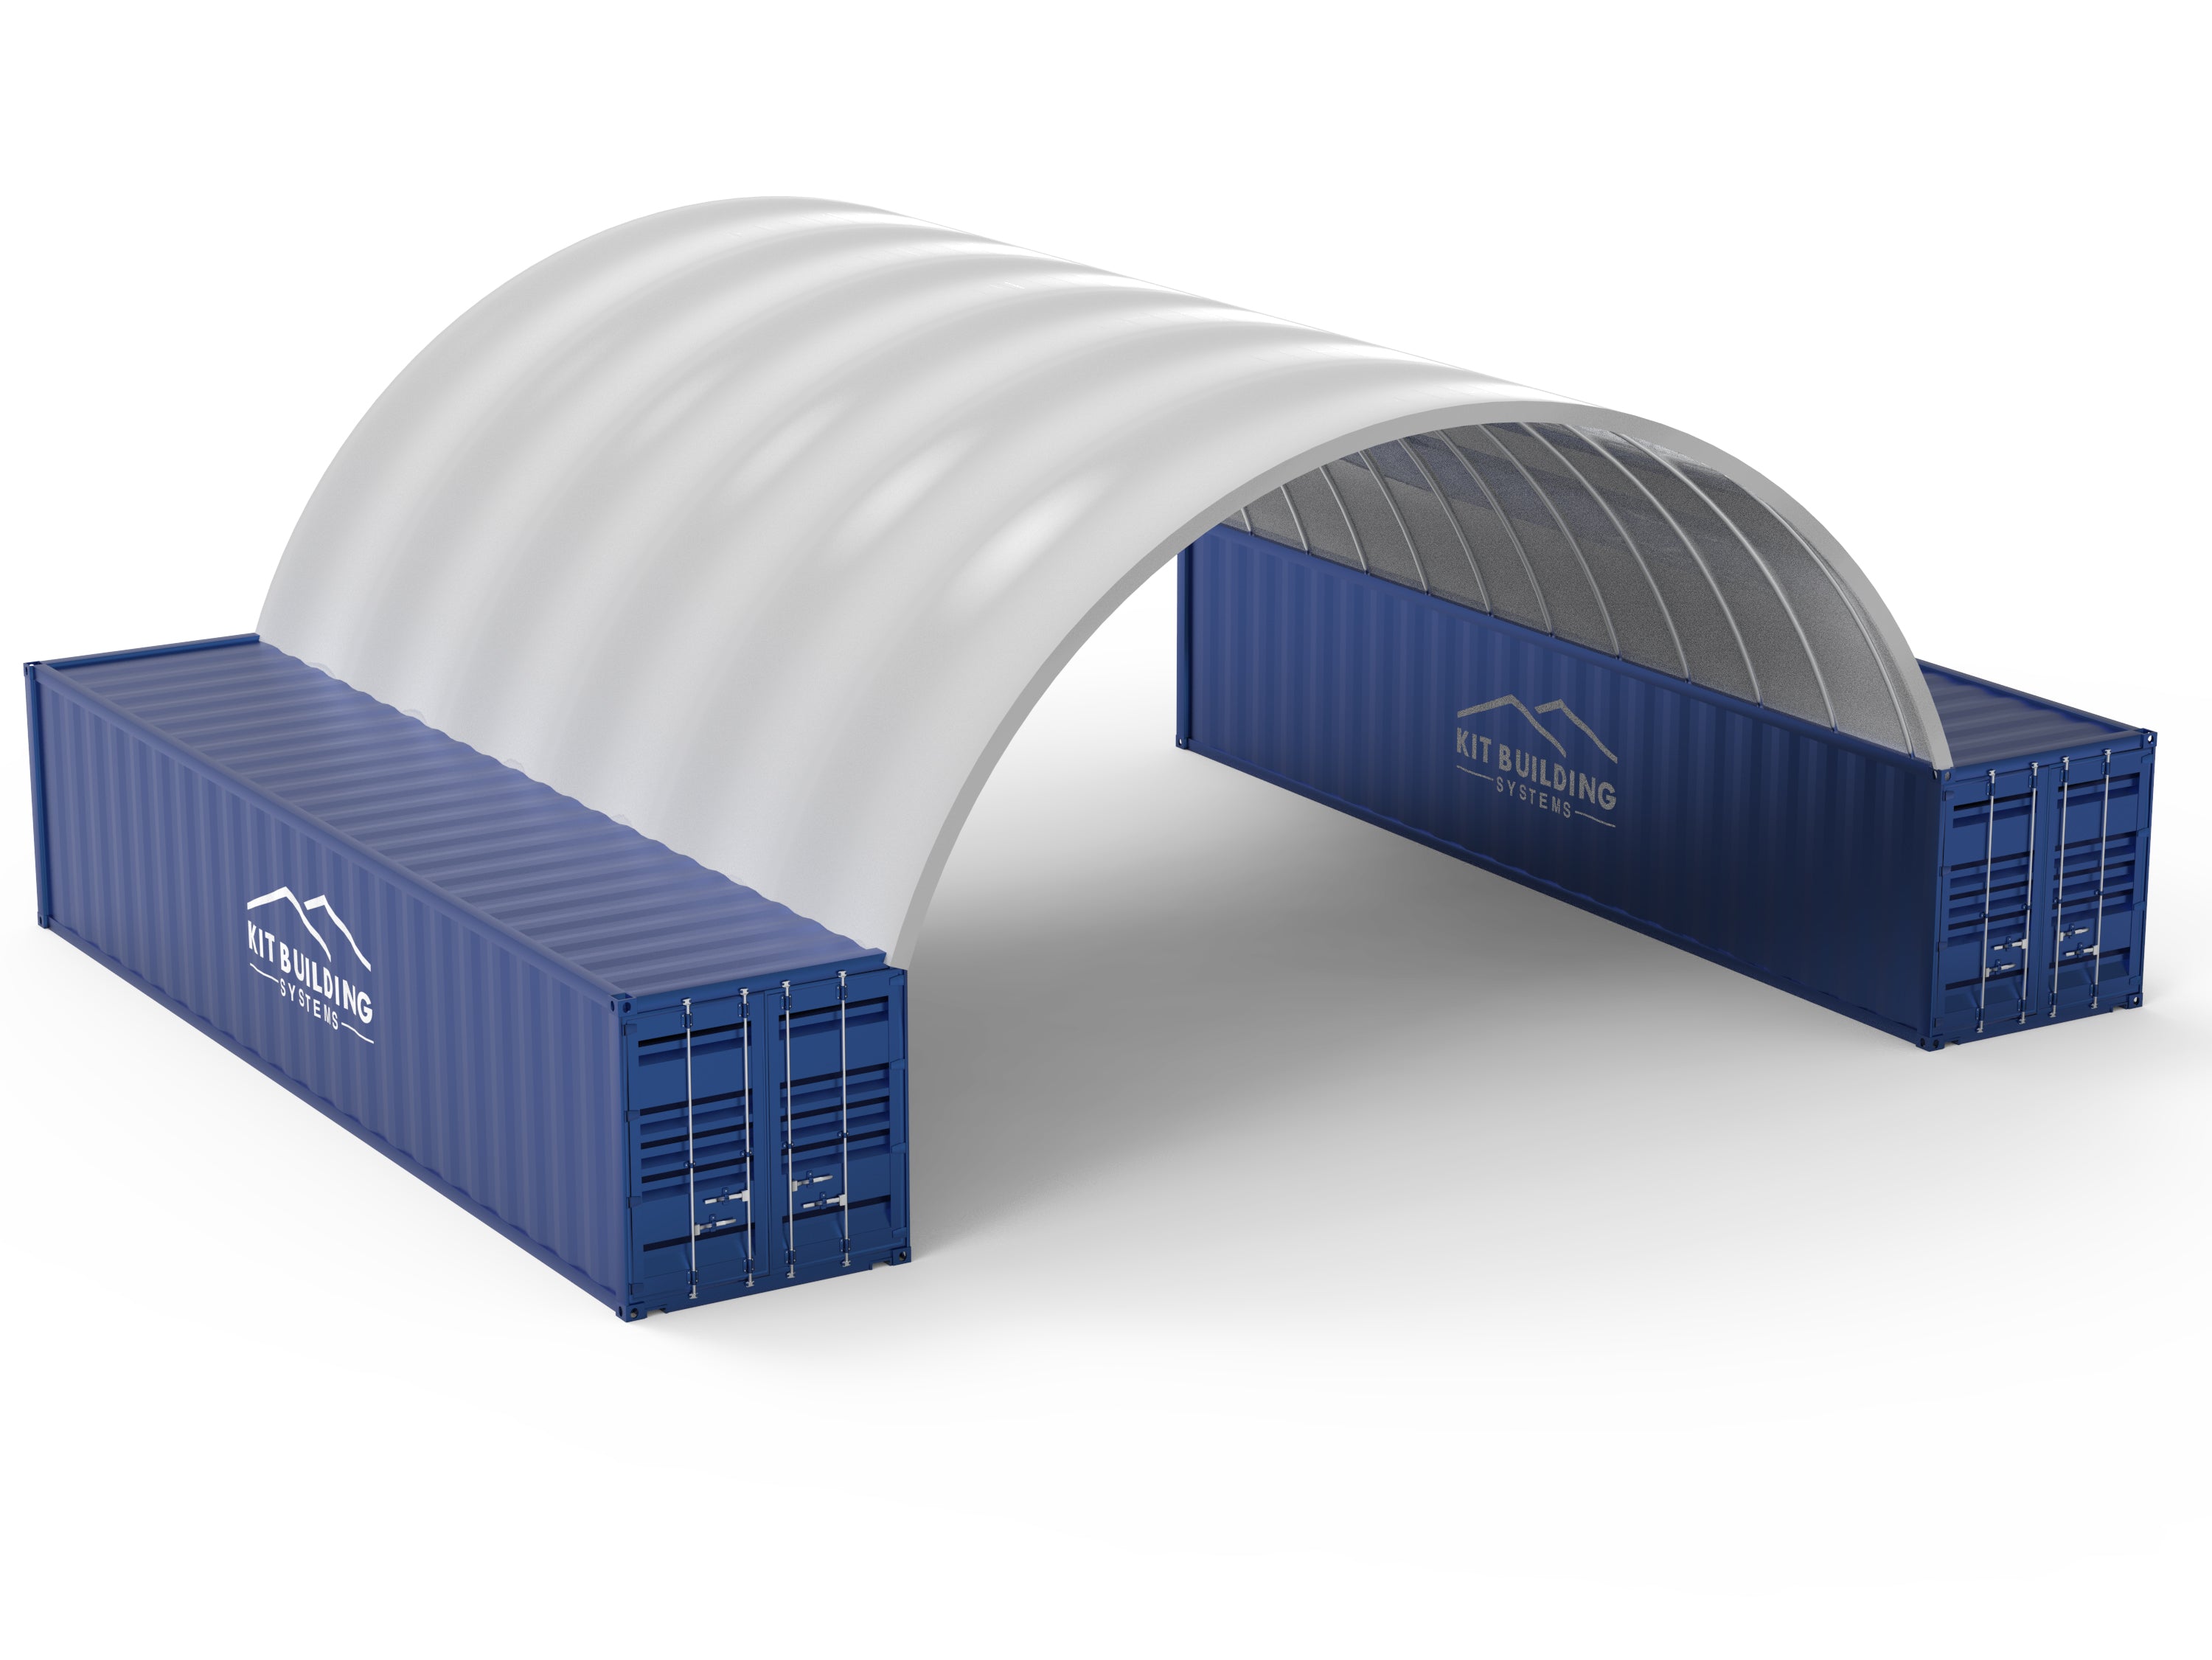 Containeropvang - 33ft x 40ft x 12ft (10m x 12m x 3,6m)